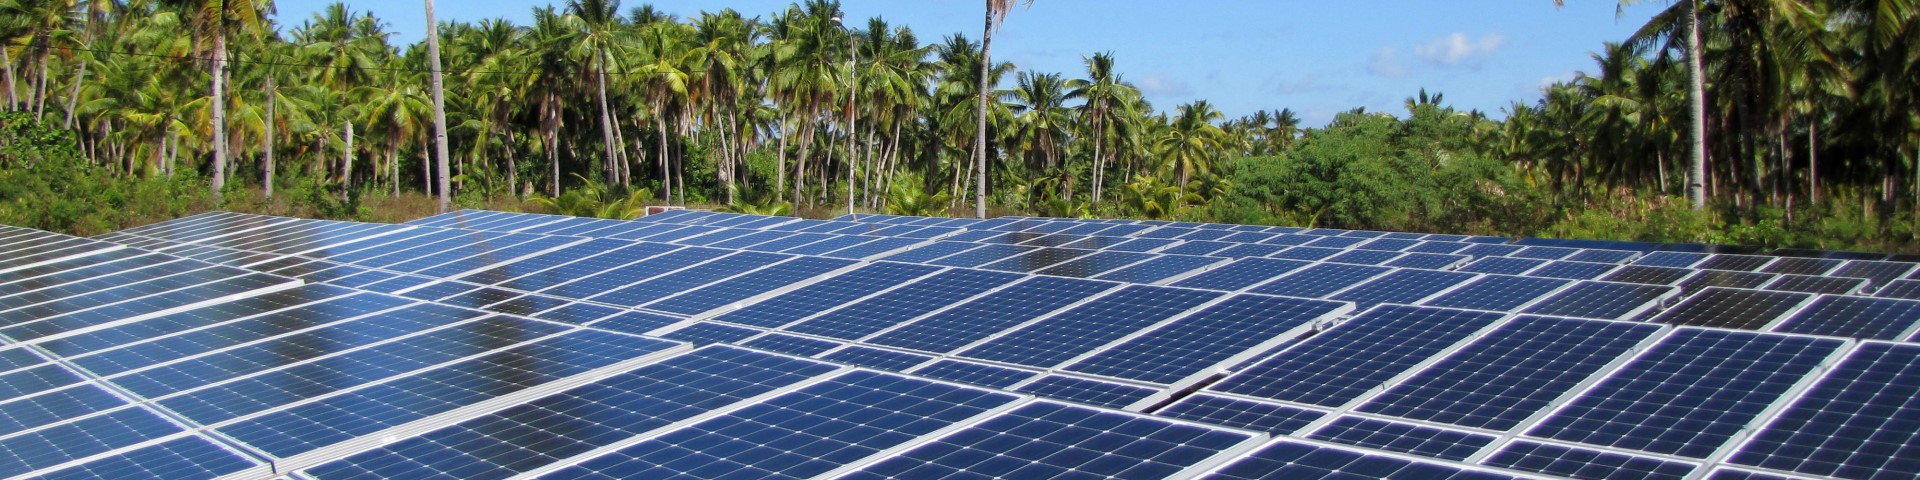 Several rows of solar collectors in the Global South with palm trees in the background. 